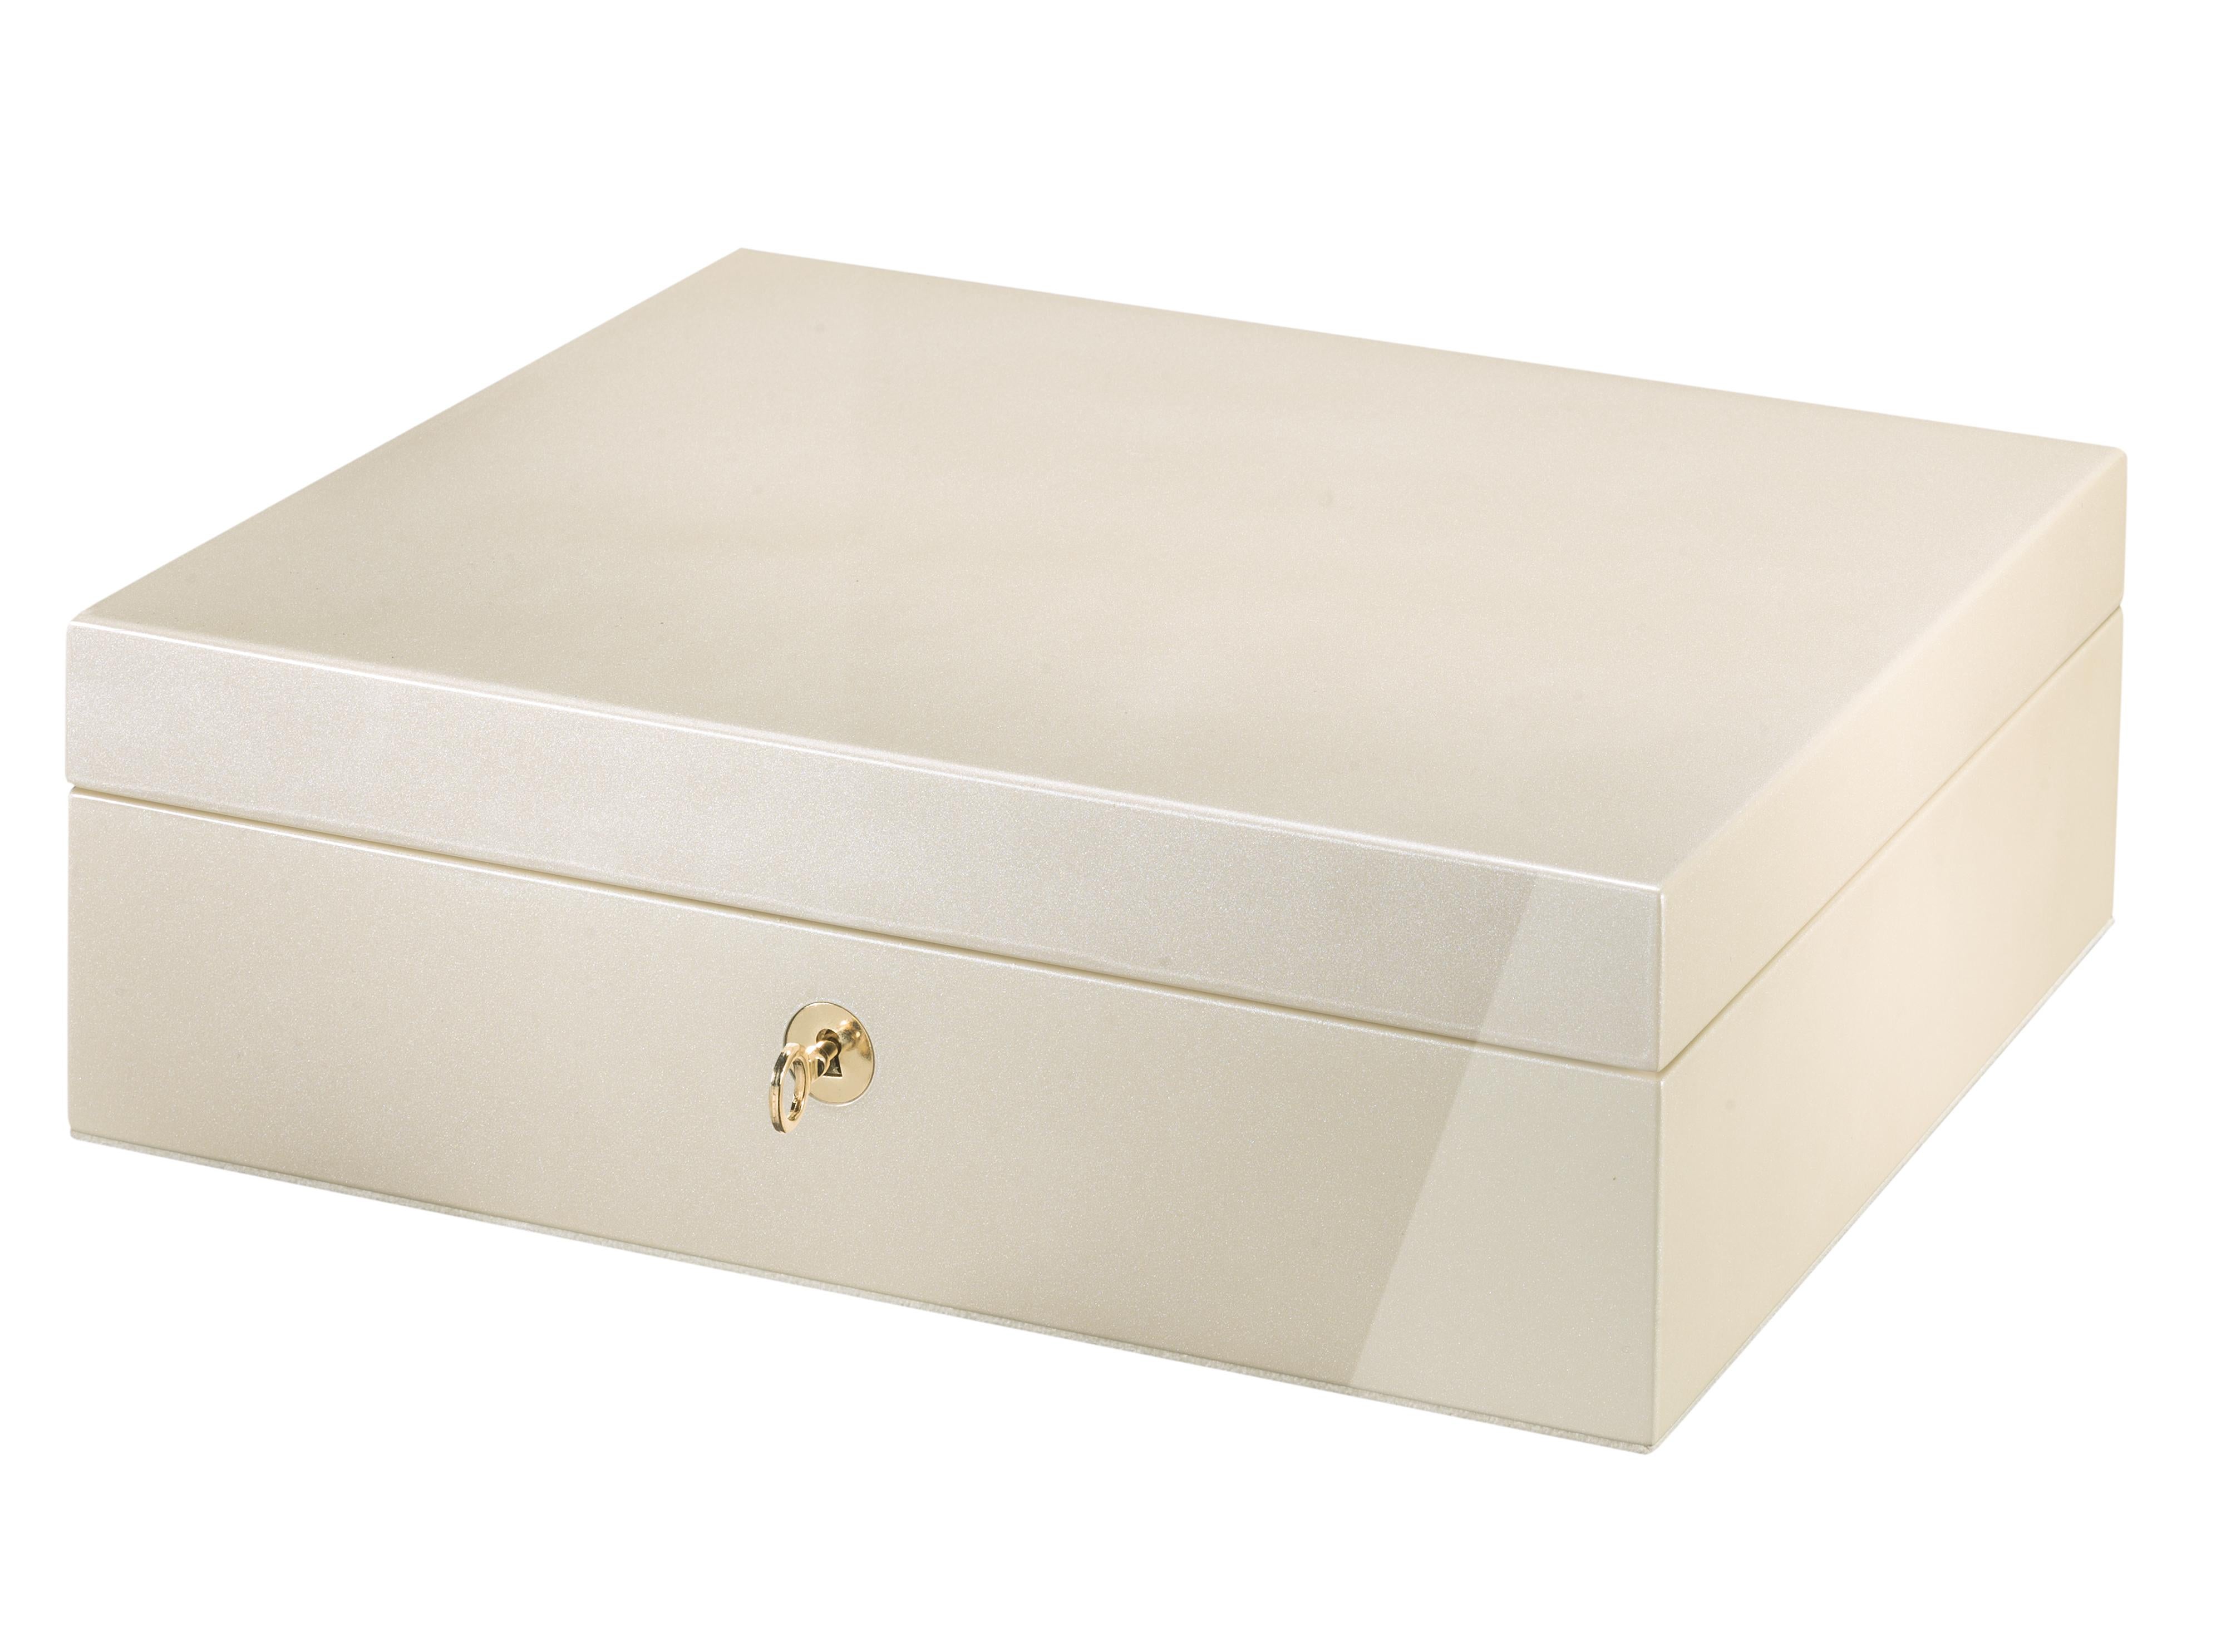 This jewelry box is part of the Firenze Collection of refined, wood-handcrafted objets d'art. Featured in a delicate mother-of-pearl color enhanced with a polished polyester finish and gold-finished metal details, it will elegantly match any